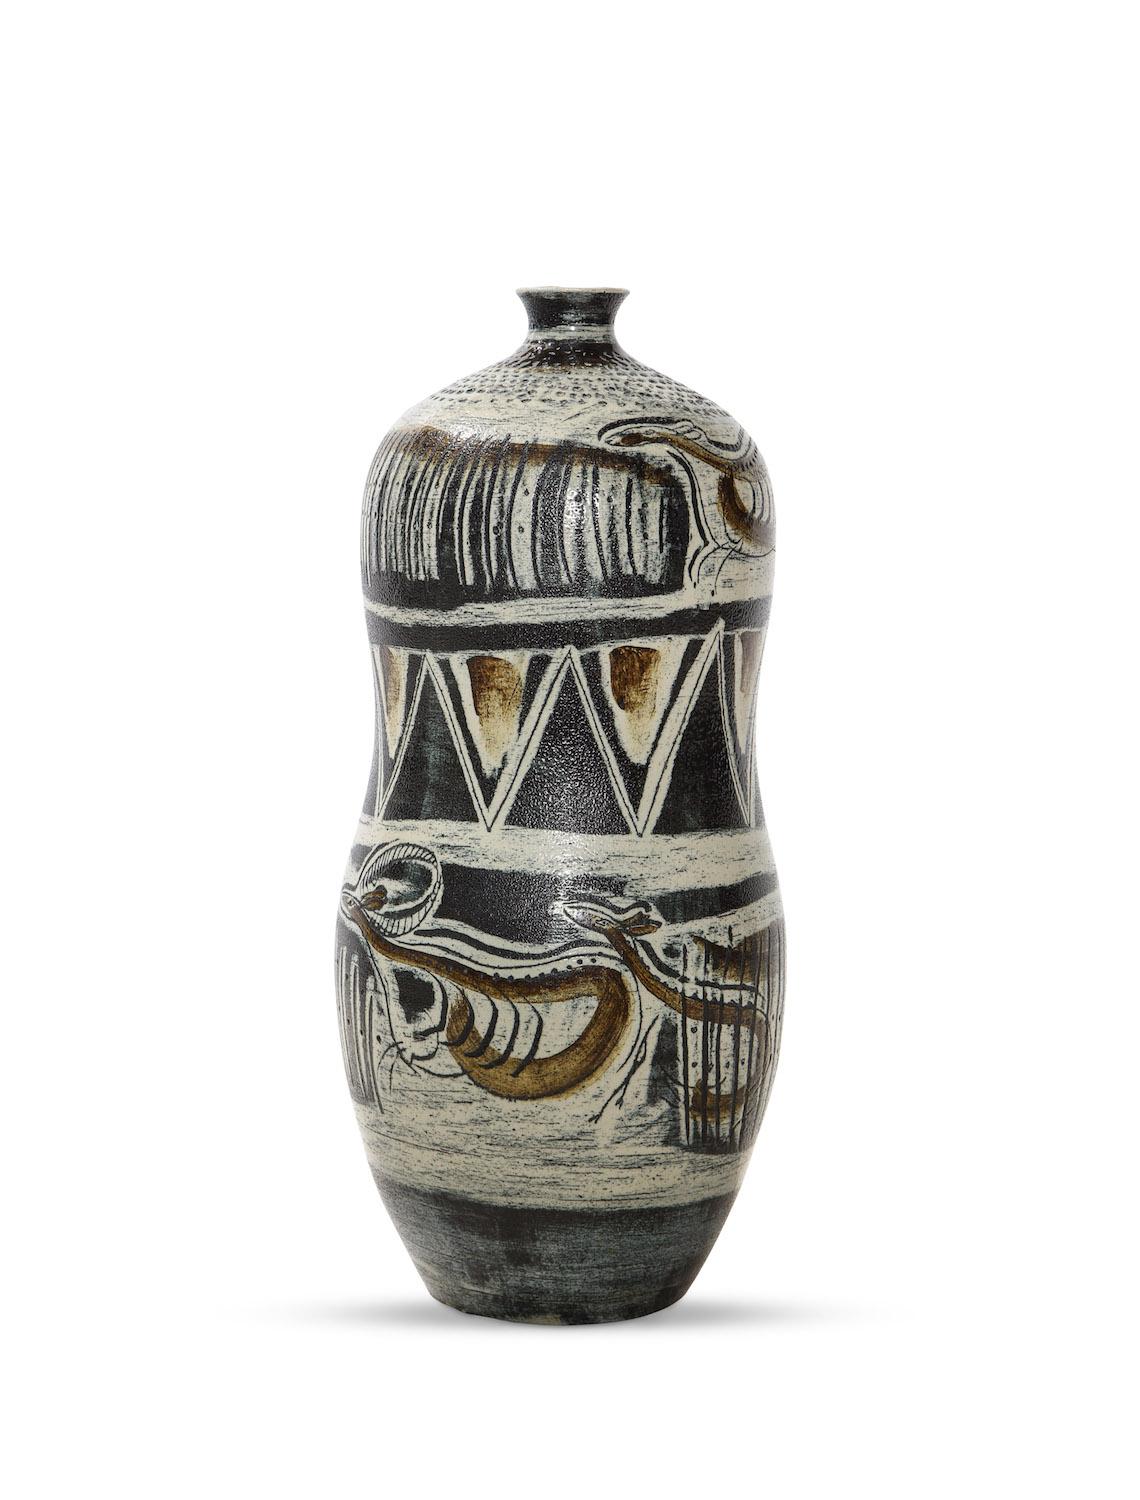 Large, handmade stoneware vase, bulbous form with incised and painted decoration. Liljefors, a painter and sculptor created work at Gustavsberg in Sweden on and off during the late 1940s and 1950s. Works by him of this scale are very rare.